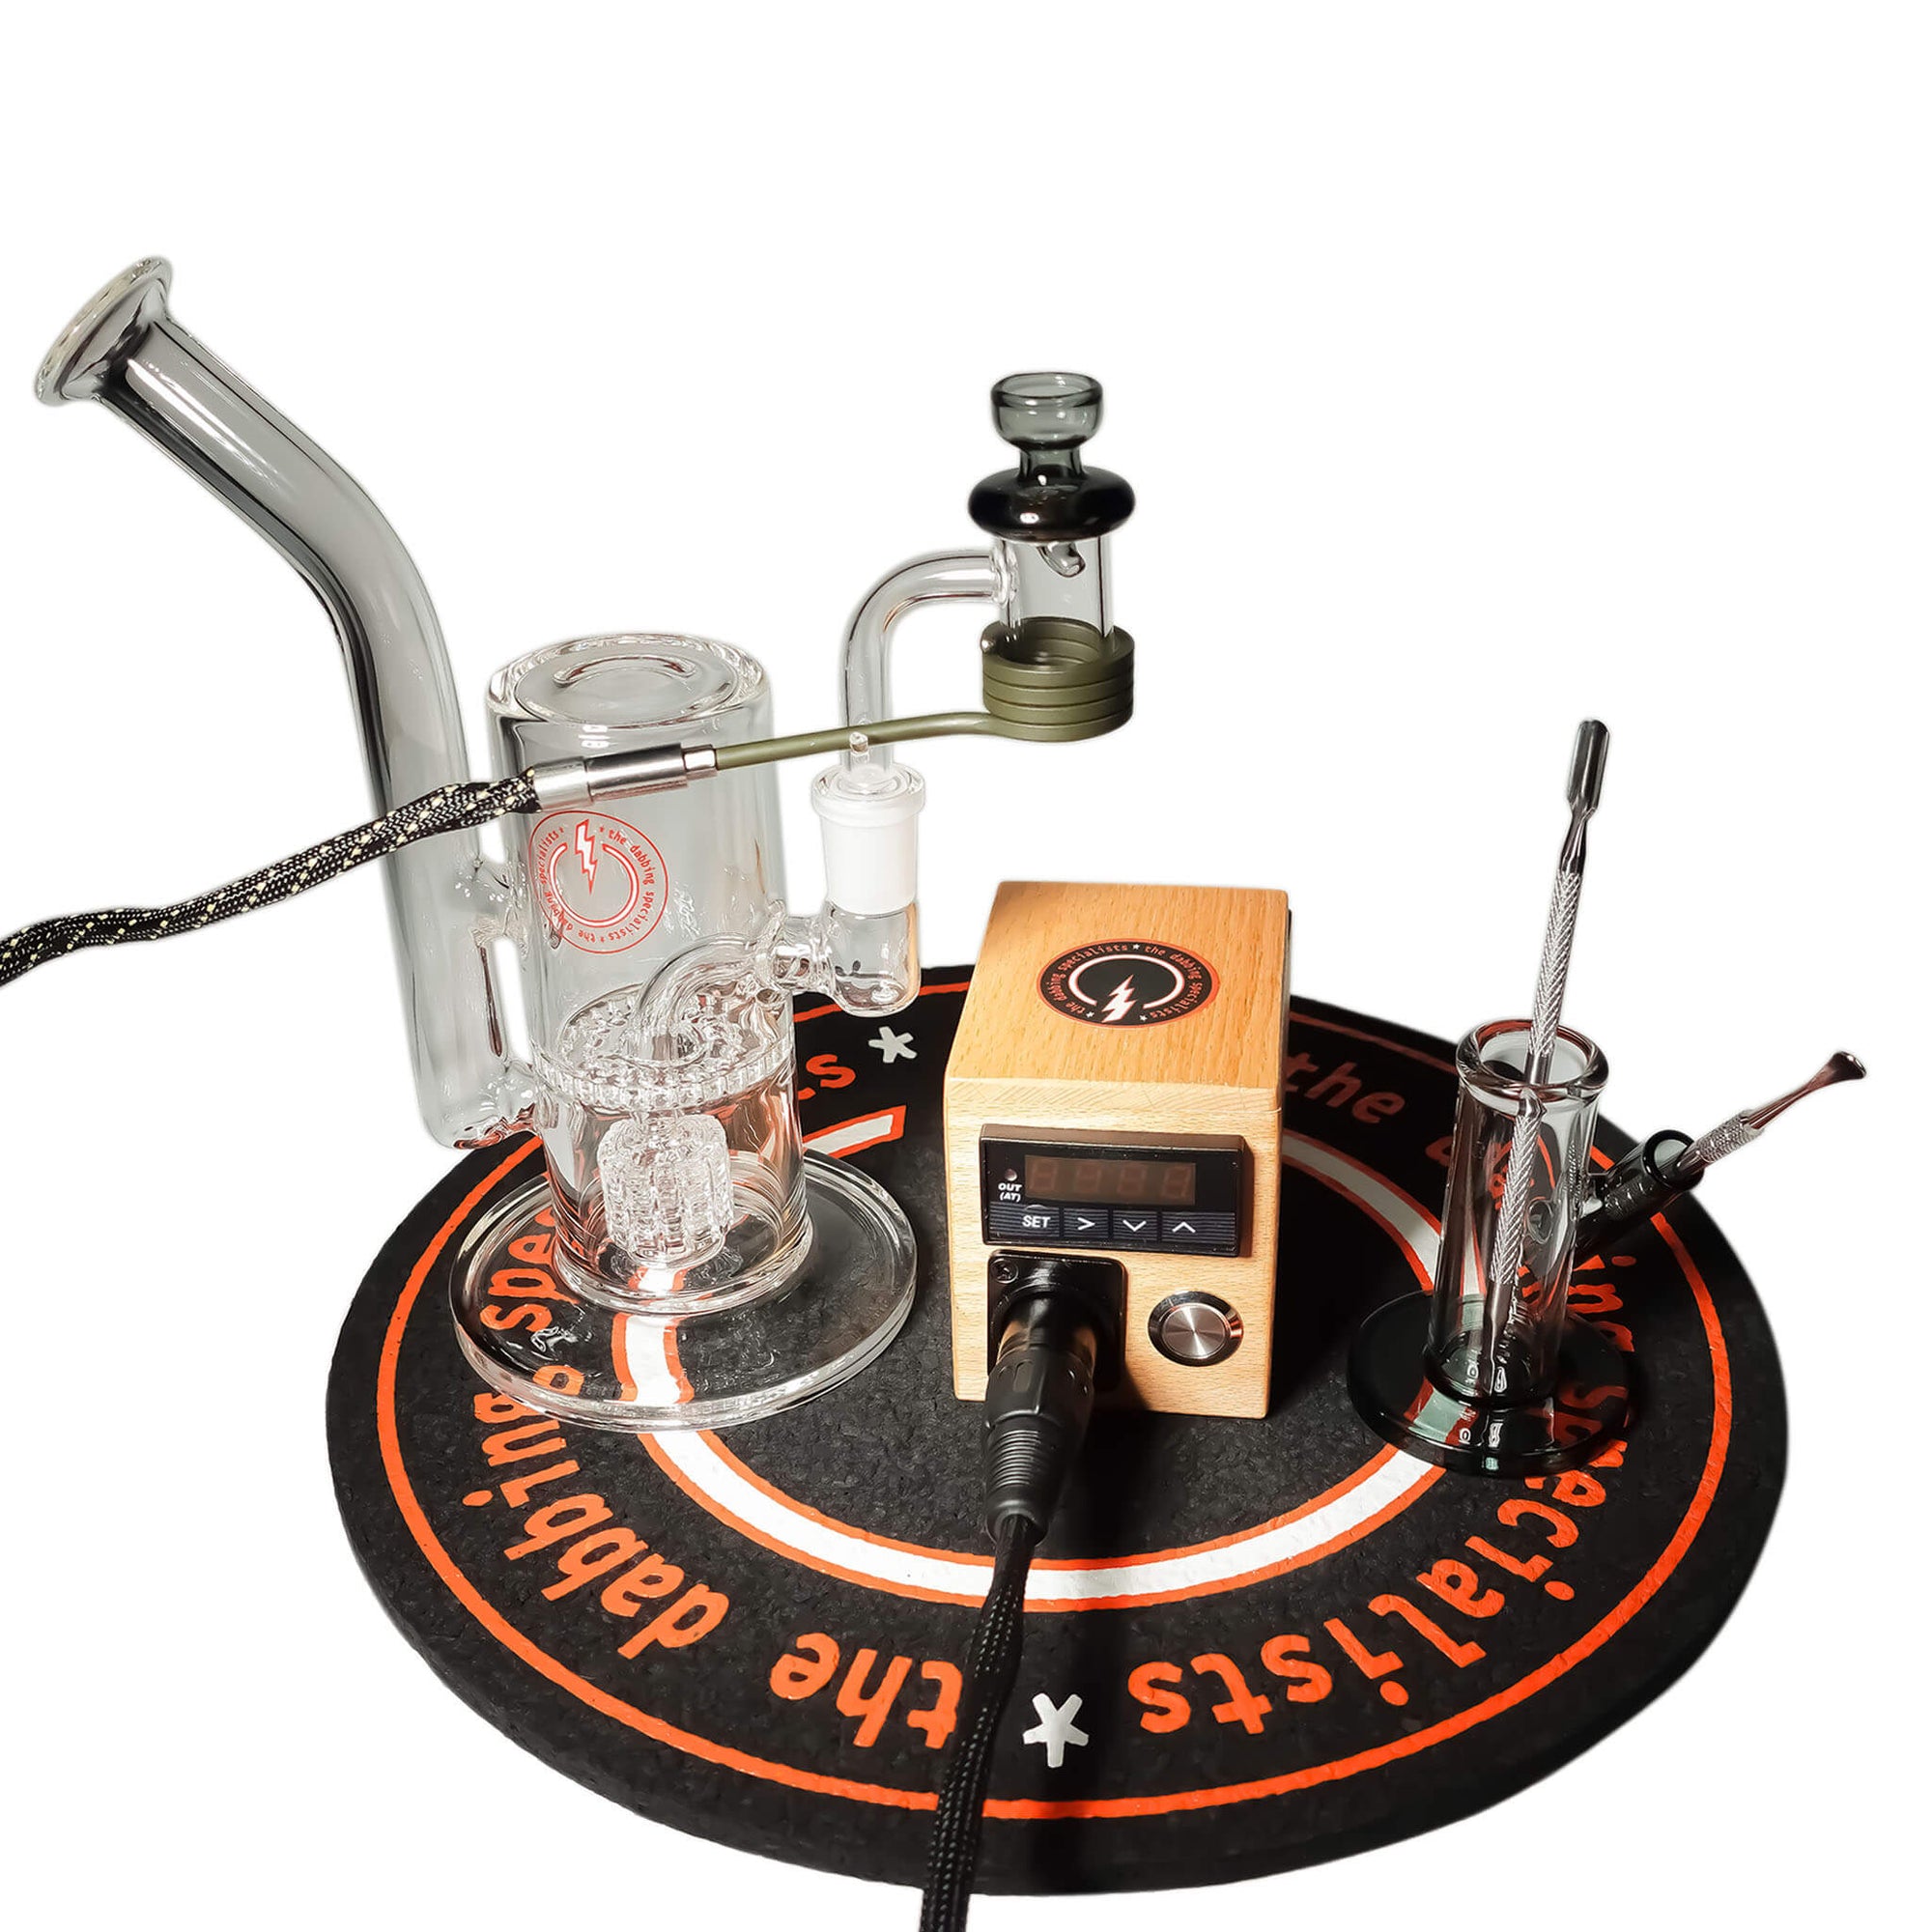 Reborn 20mm E-Banger Deluxe Enail Kit | Wood Grain Kit View | the dabbing specialists